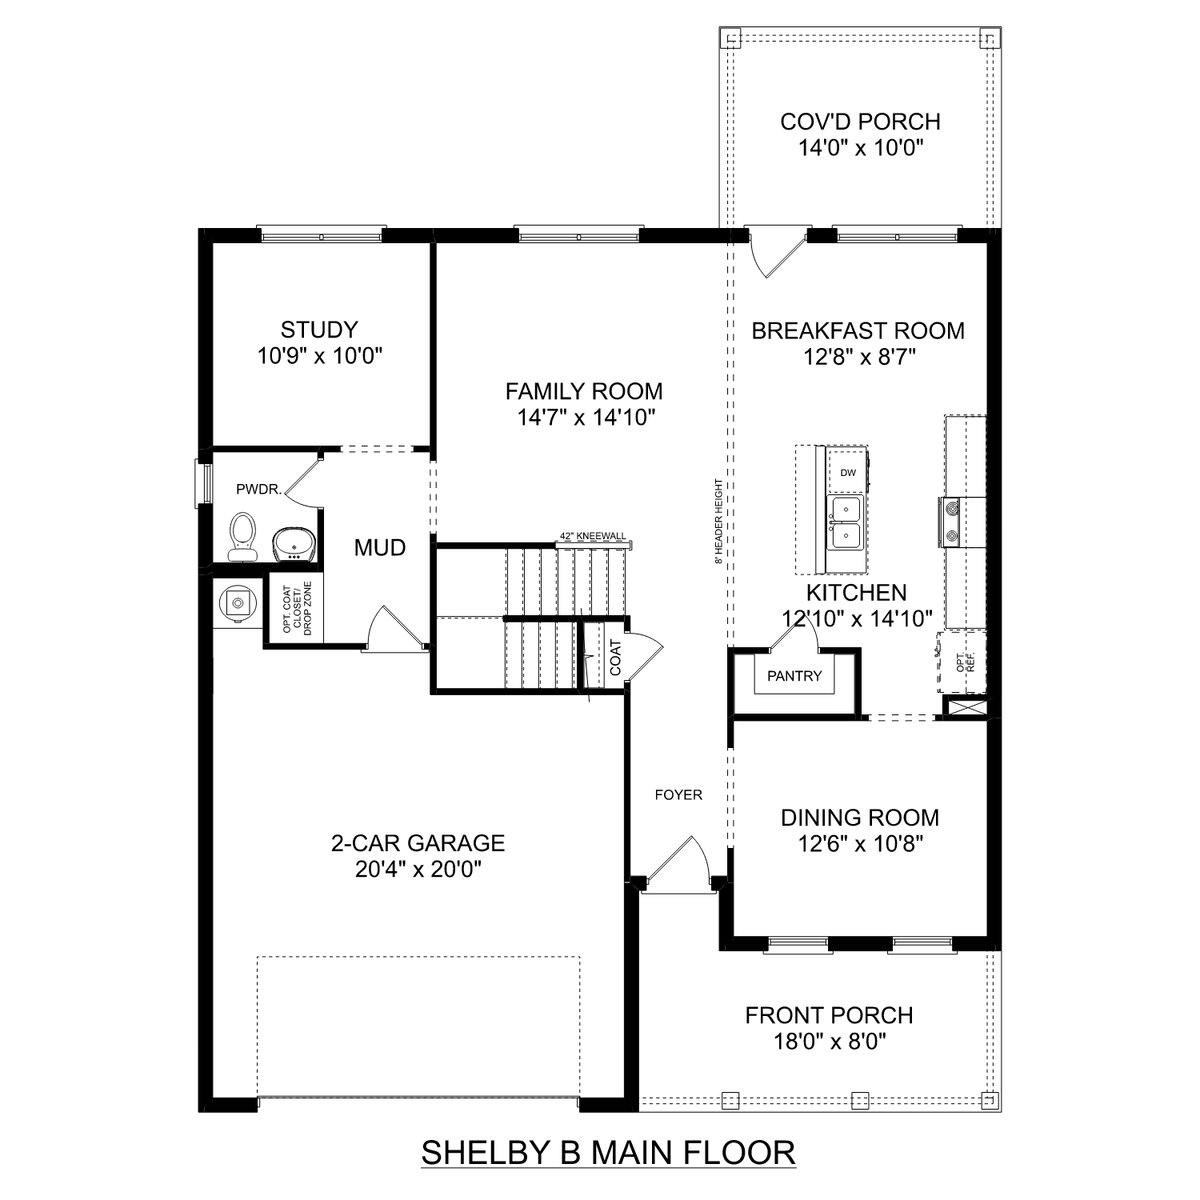 1 - The Shelby B buildable floor plan layout in Davidson Homes' Spragins Cove community.